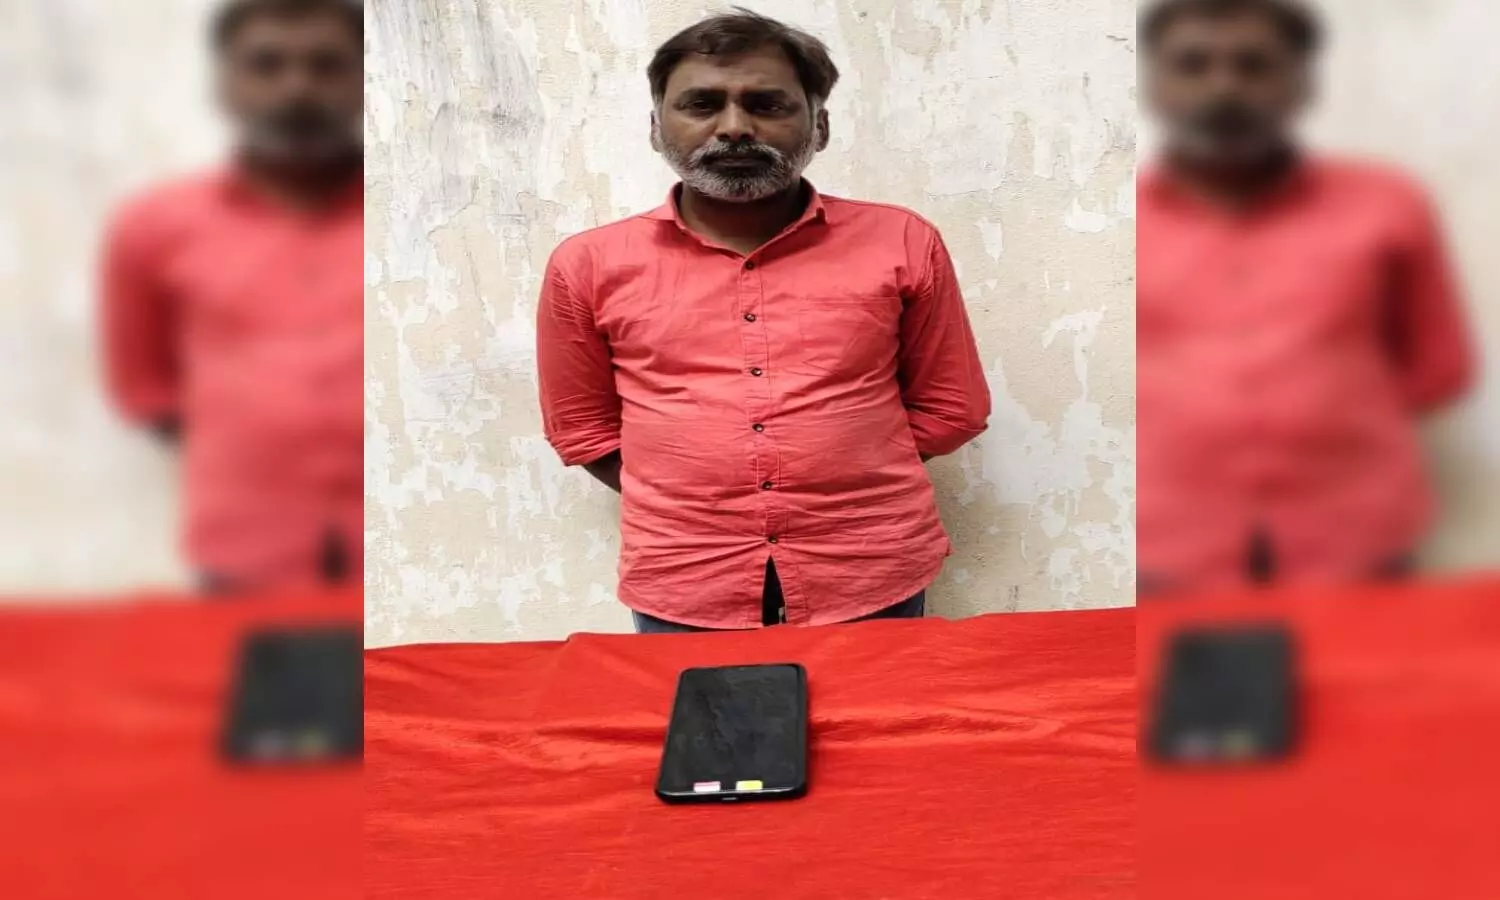 Man arrested for impersonating KCRs secretary, cheating people